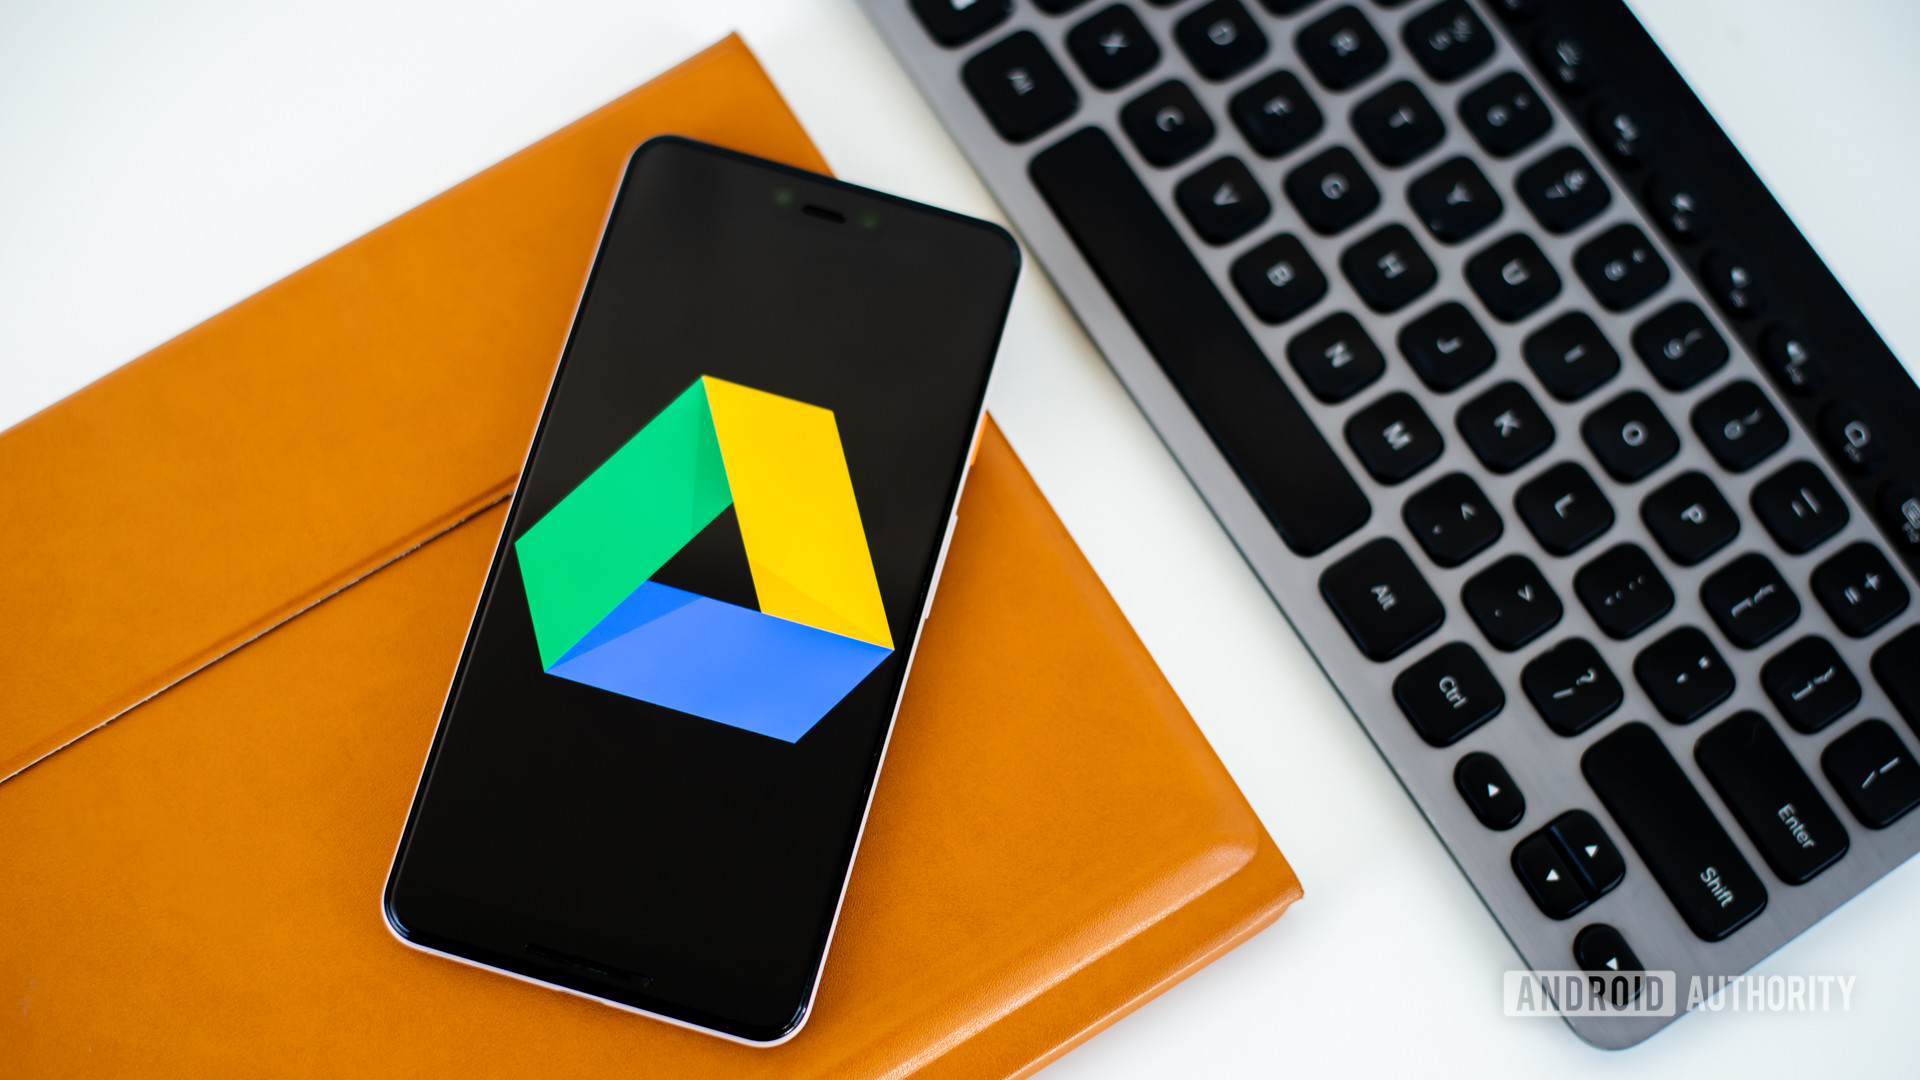 Buffering begone: Google Drive speeds up video playback, upgrades mobile search